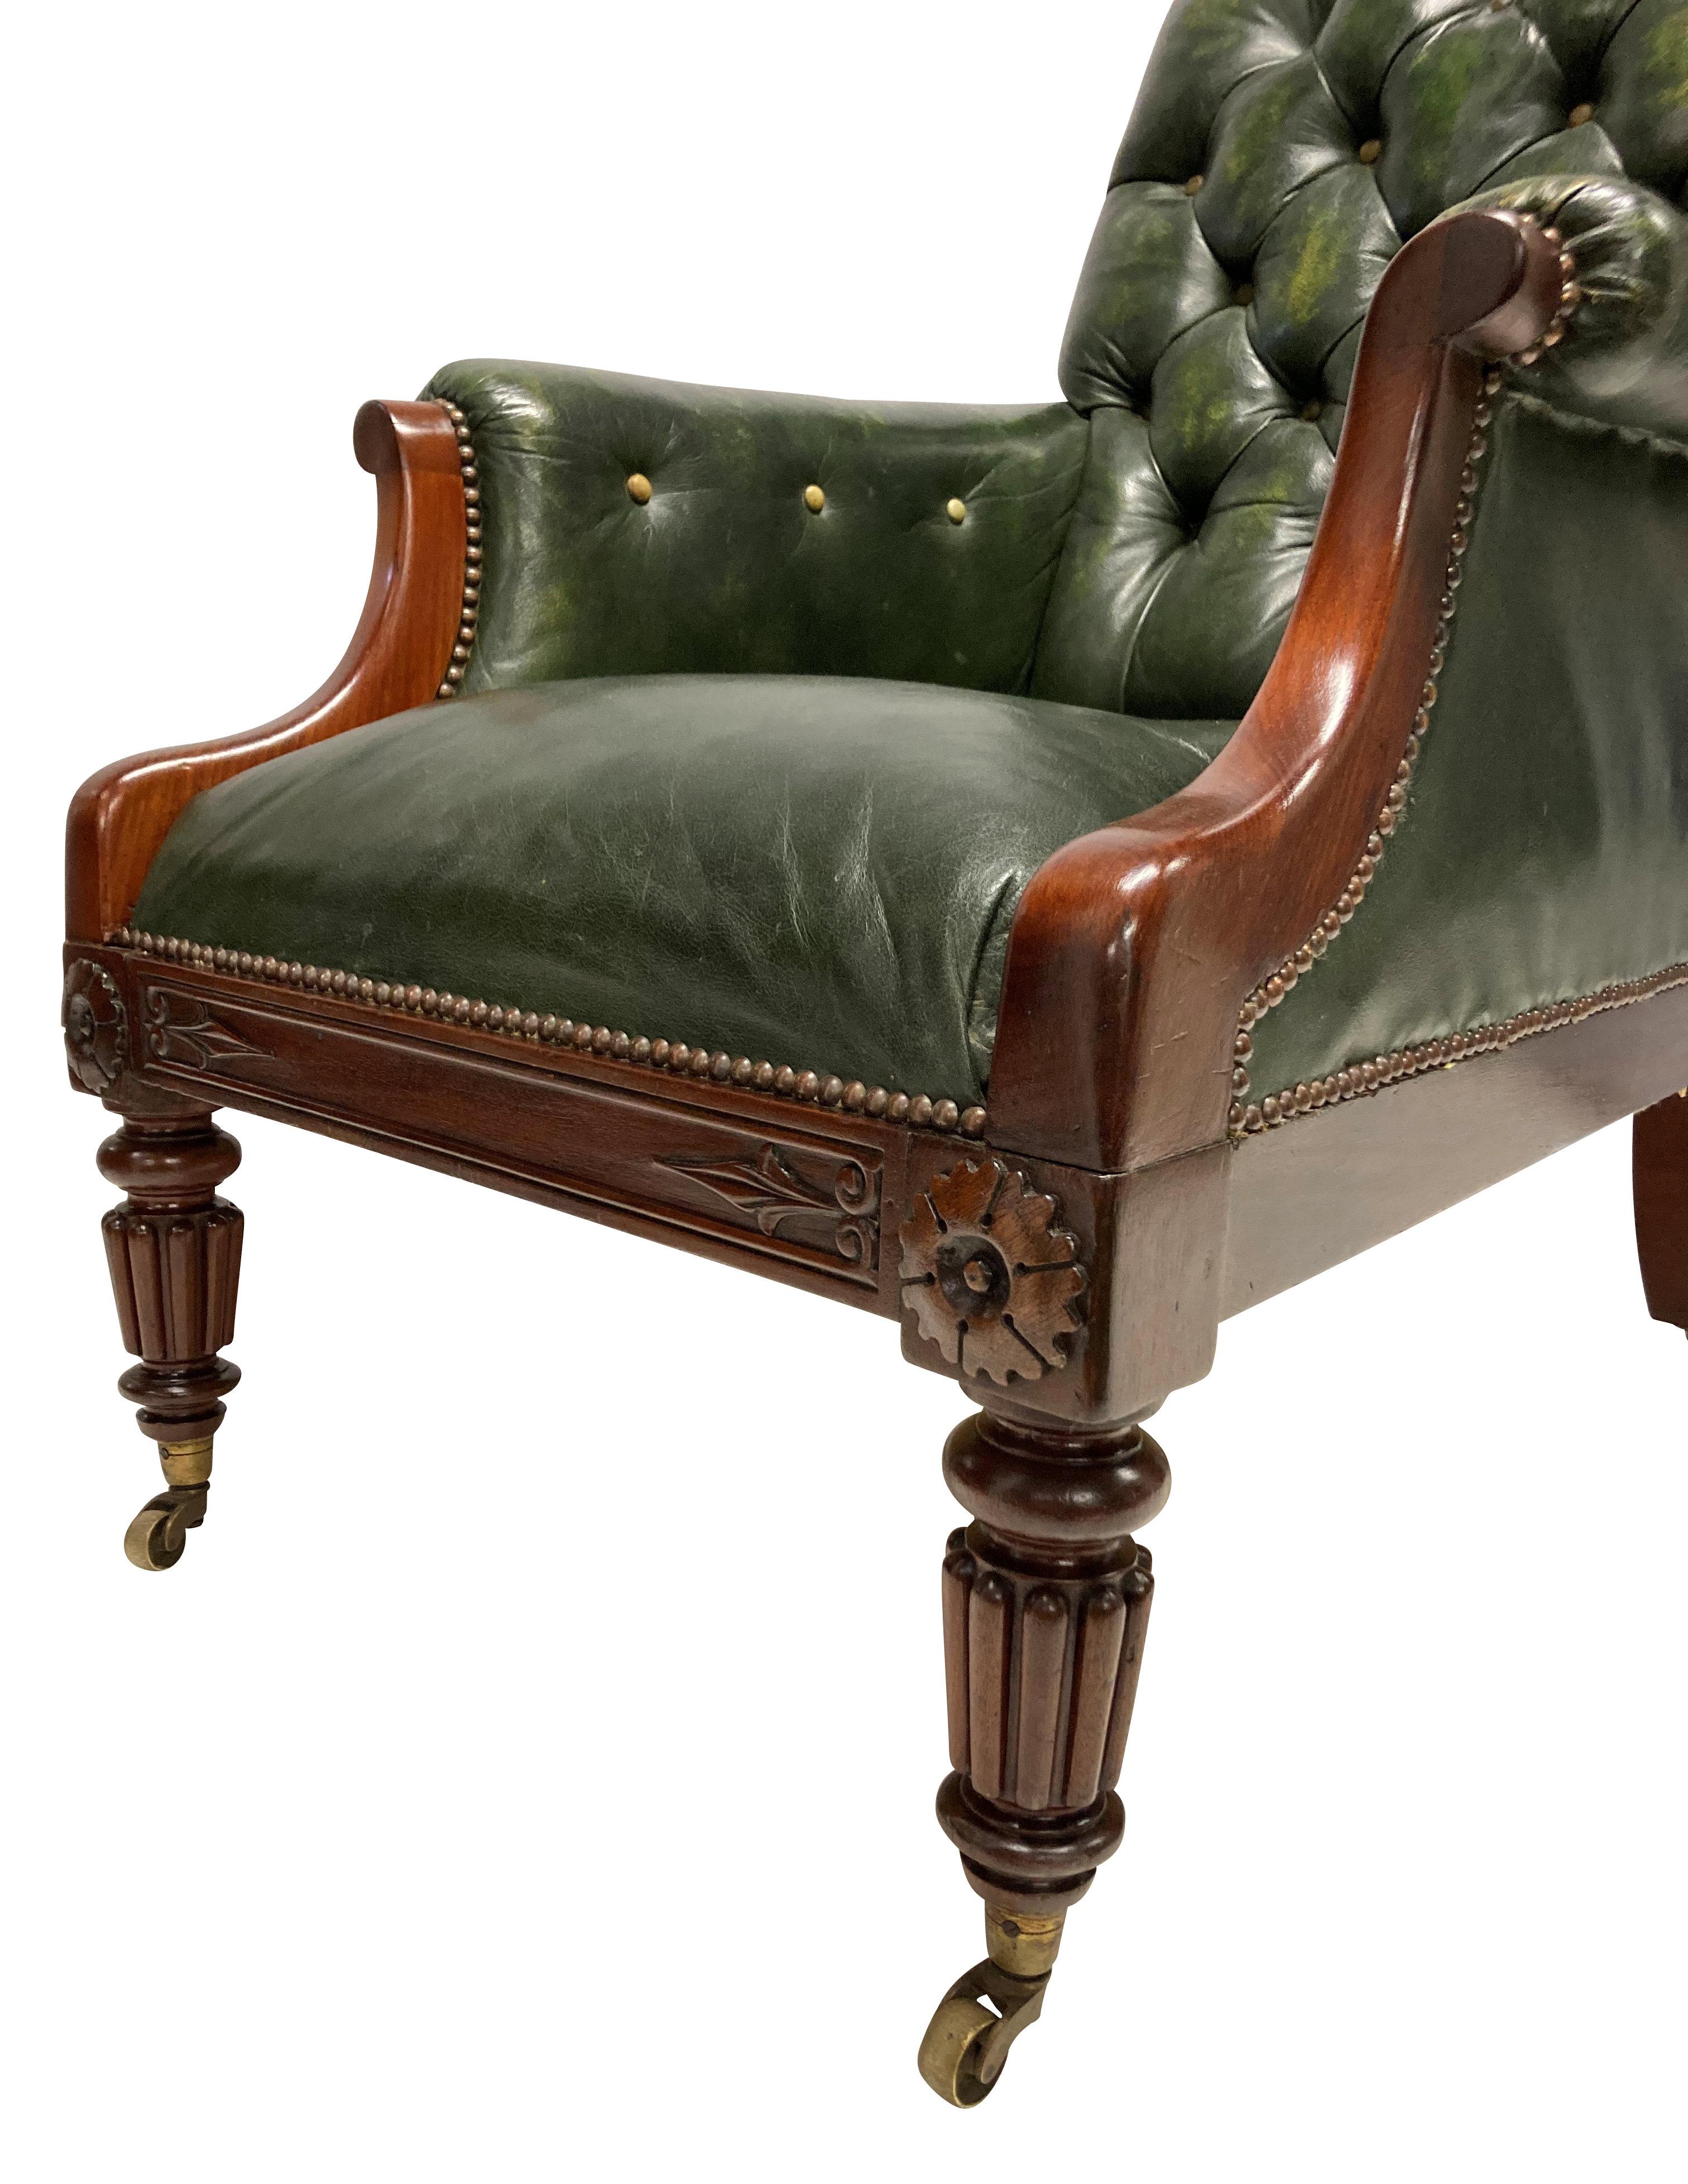 An English, William IV mahogany library chair, with fluted legs and anthemion decoration. It has been upholstered in green leather, with buff leather buttoning.